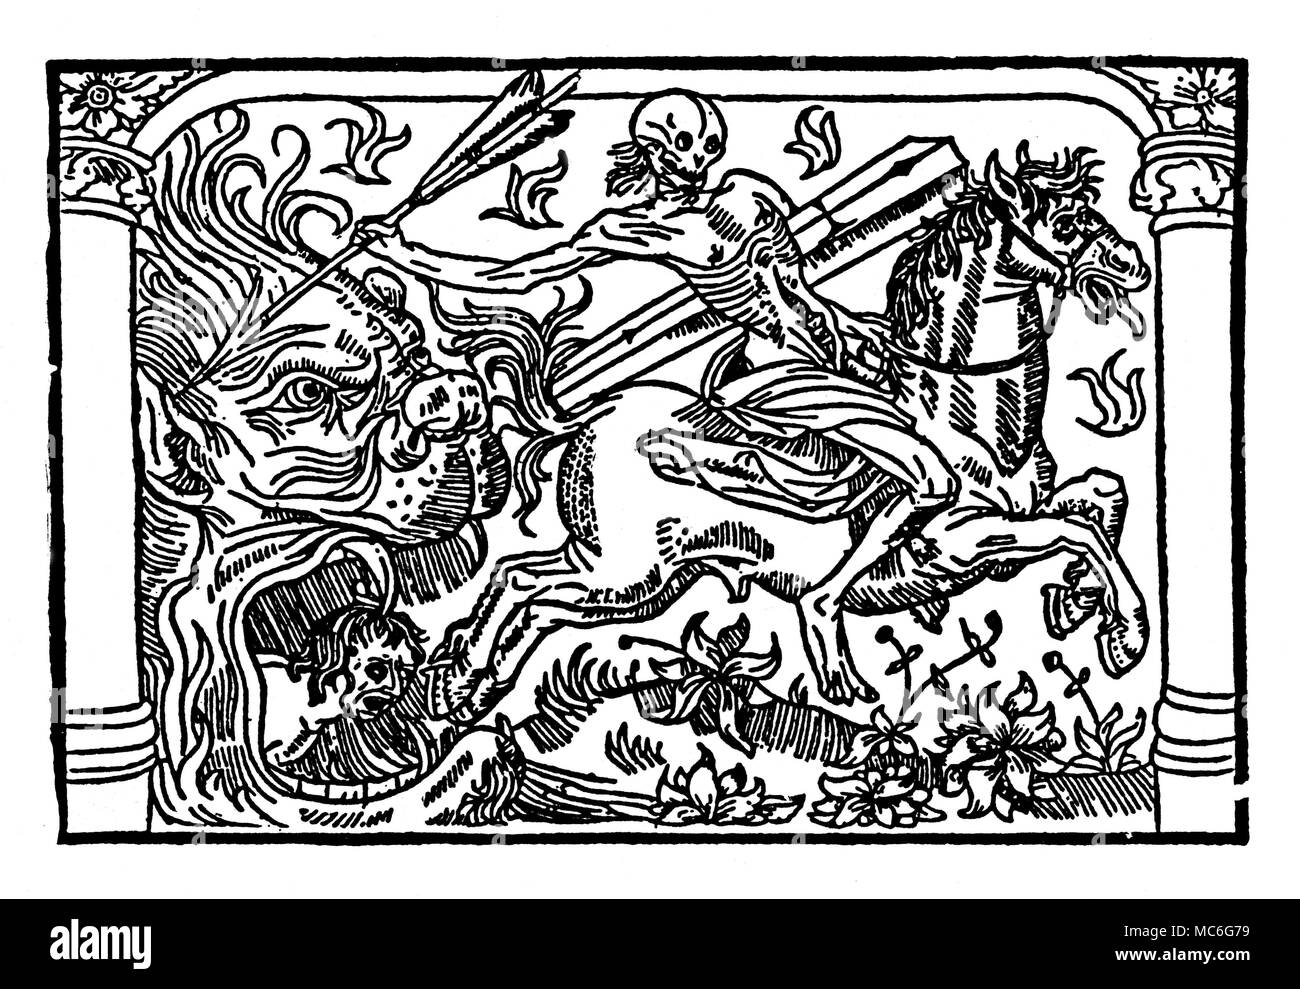 DEATH - HELL Death riding out from the jaws of Hell, carrying a coffin beneath his left arm, and holding the fatal dart in his right hand. From Le Grant Kalendrier & compost des Bergiers avecq leur Astrologie, circa 1500. Stock Photo